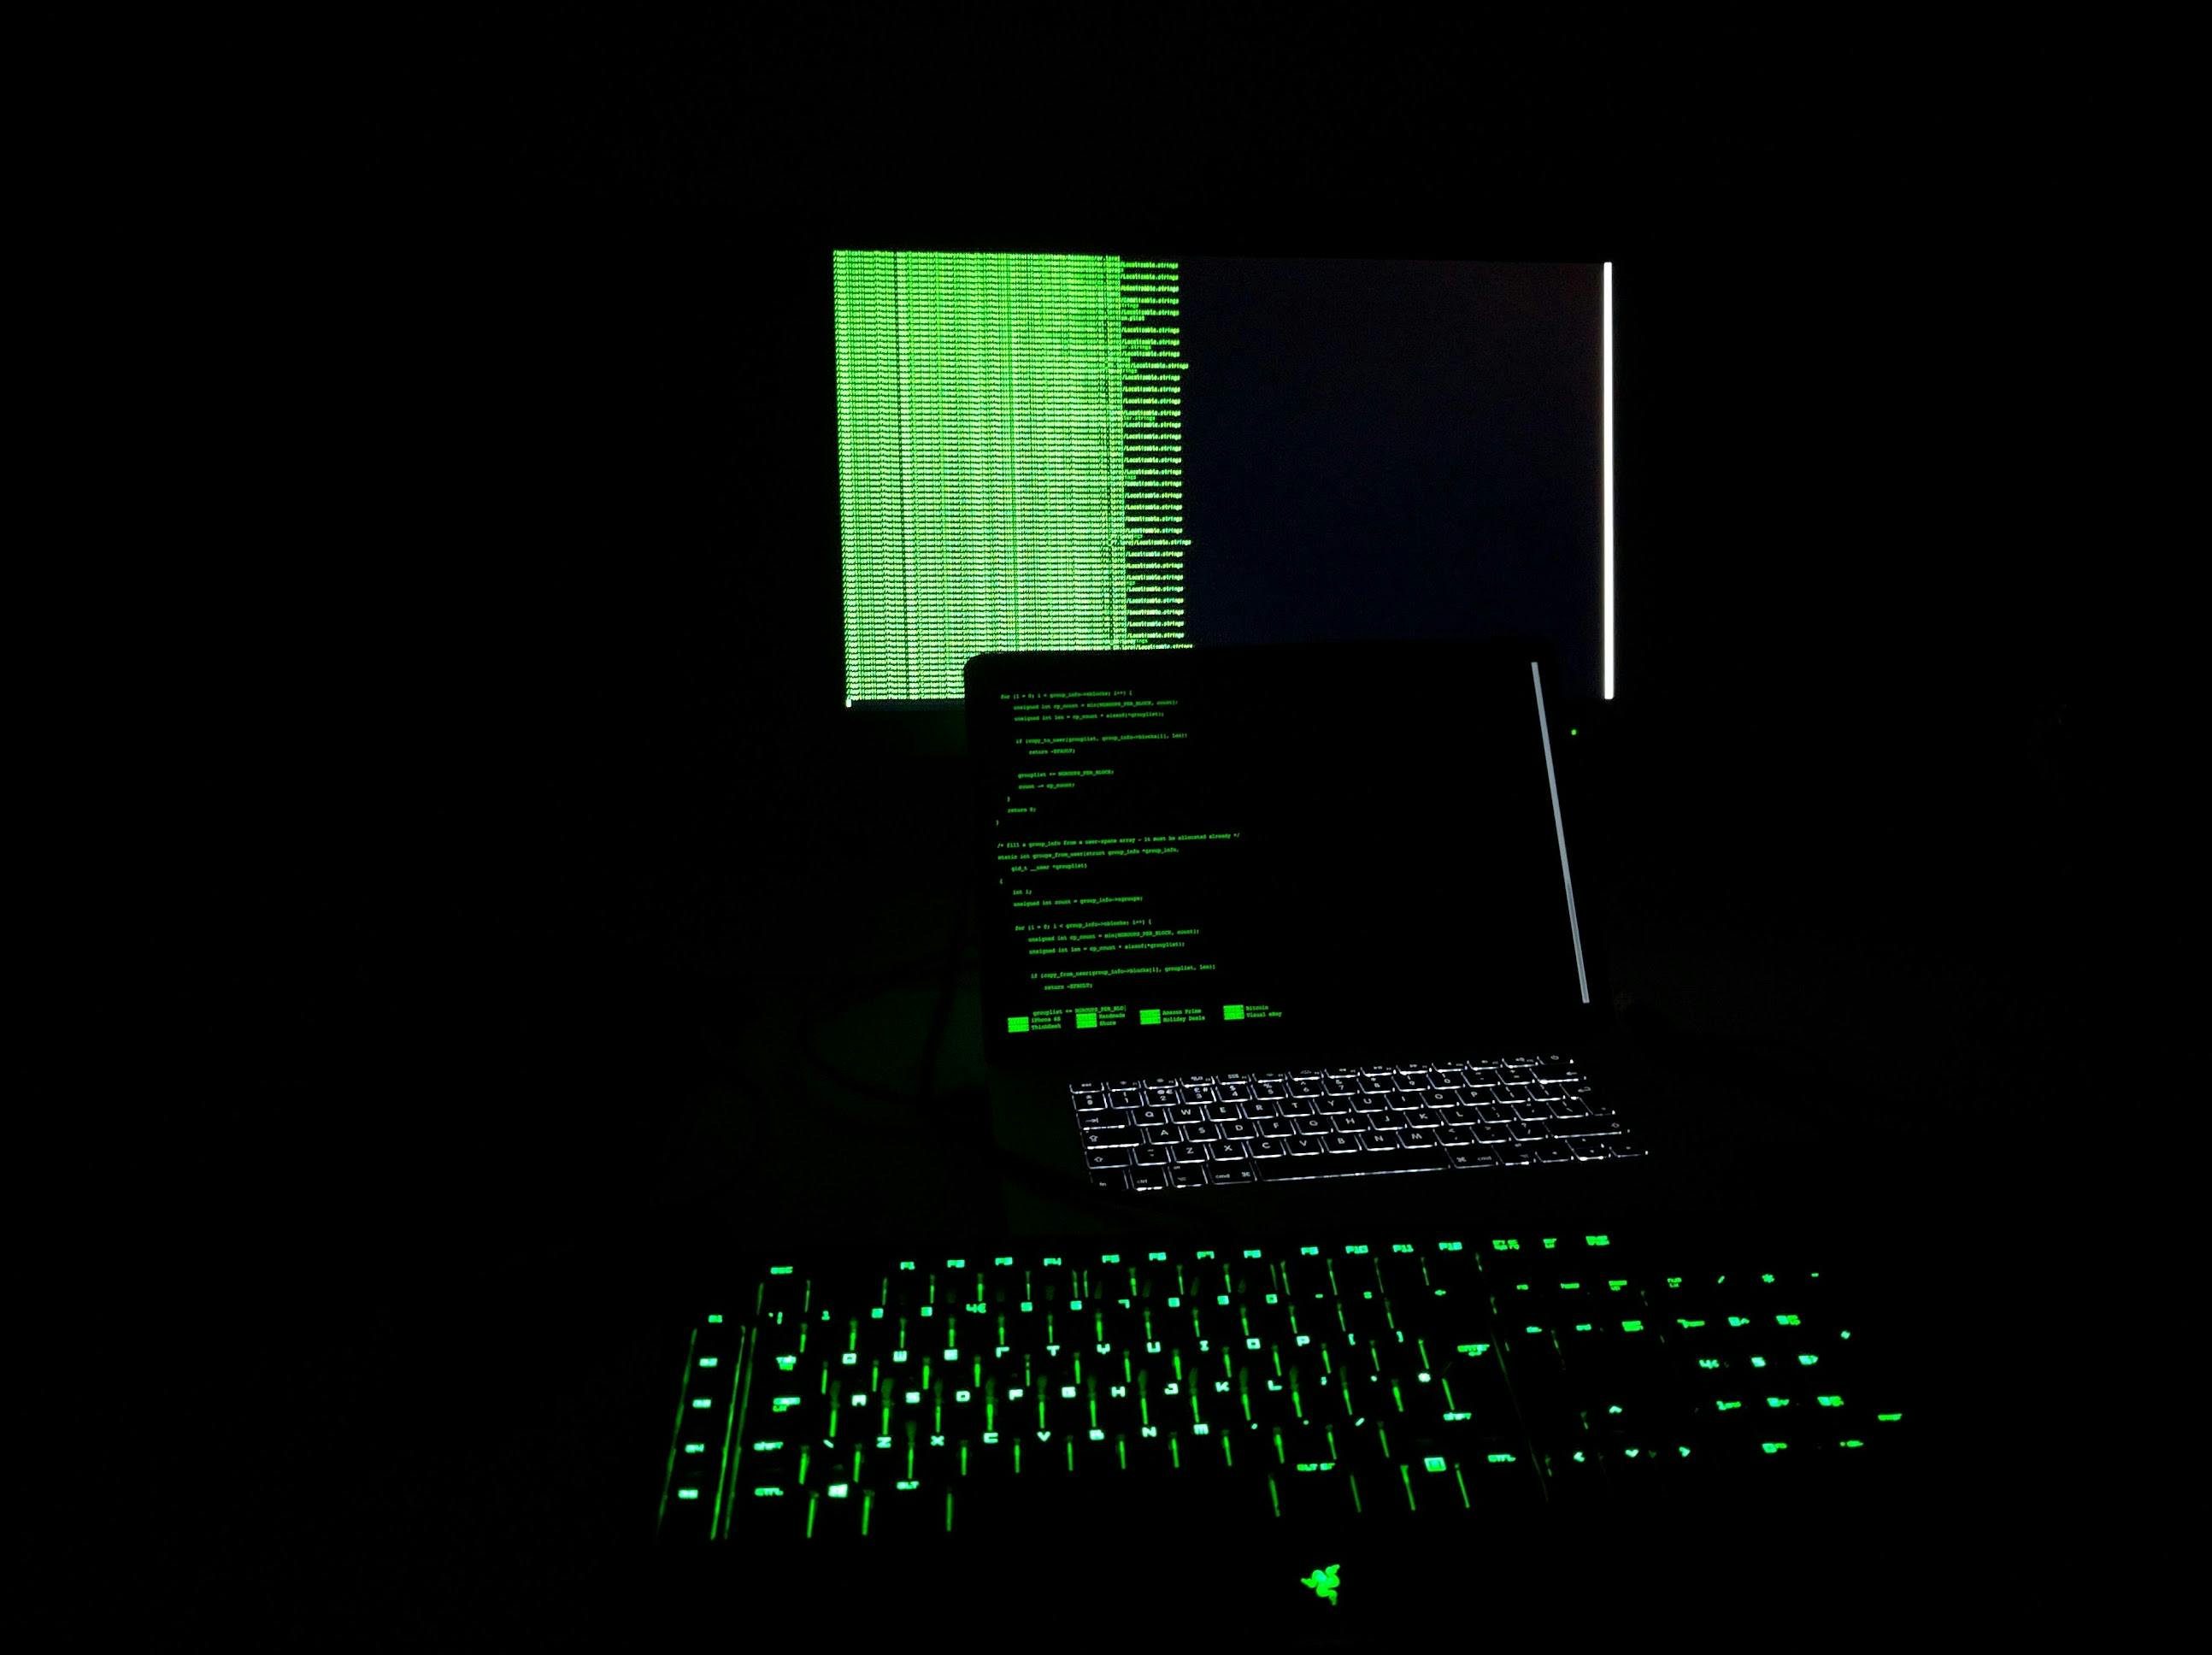 A dark room illuminated by the green glow of a backlit mechanical keyboard in the foreground and a laptop screen displaying lines of code, with a secondary monitor showing similar content in the background.